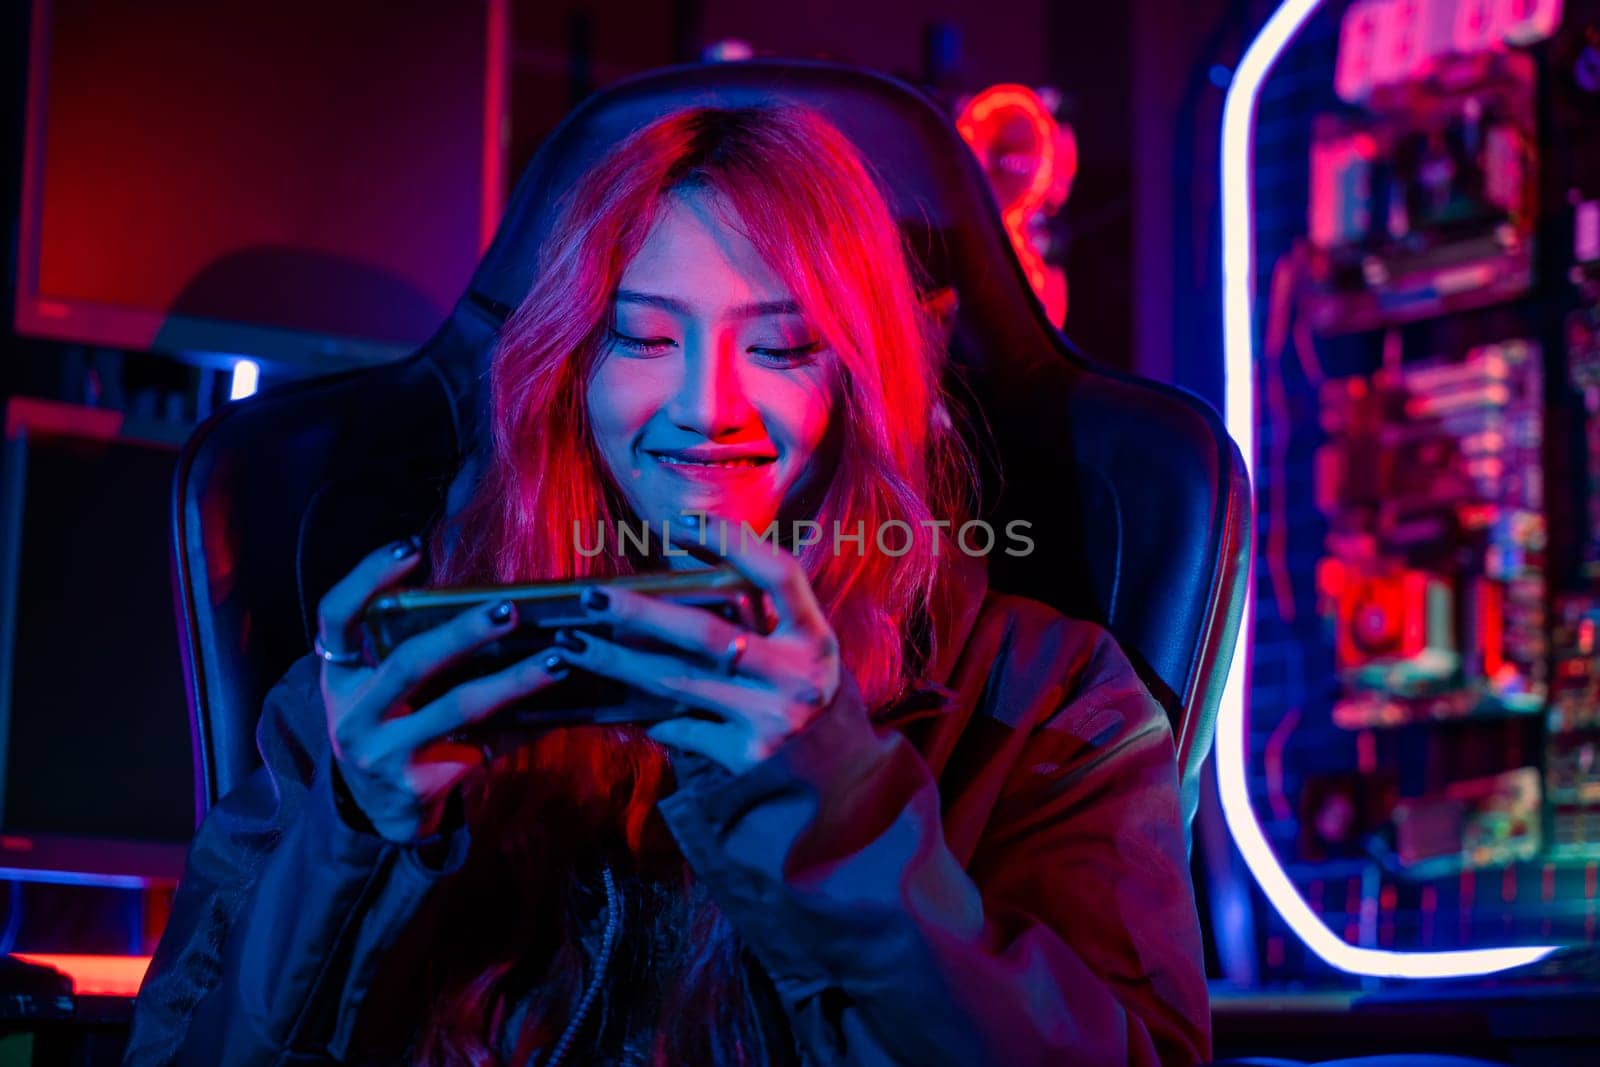 Gamer playing online game application on mobile phone wear gaming headphones, Asian woman live stream she play video game via smartphone at home neon lights living room